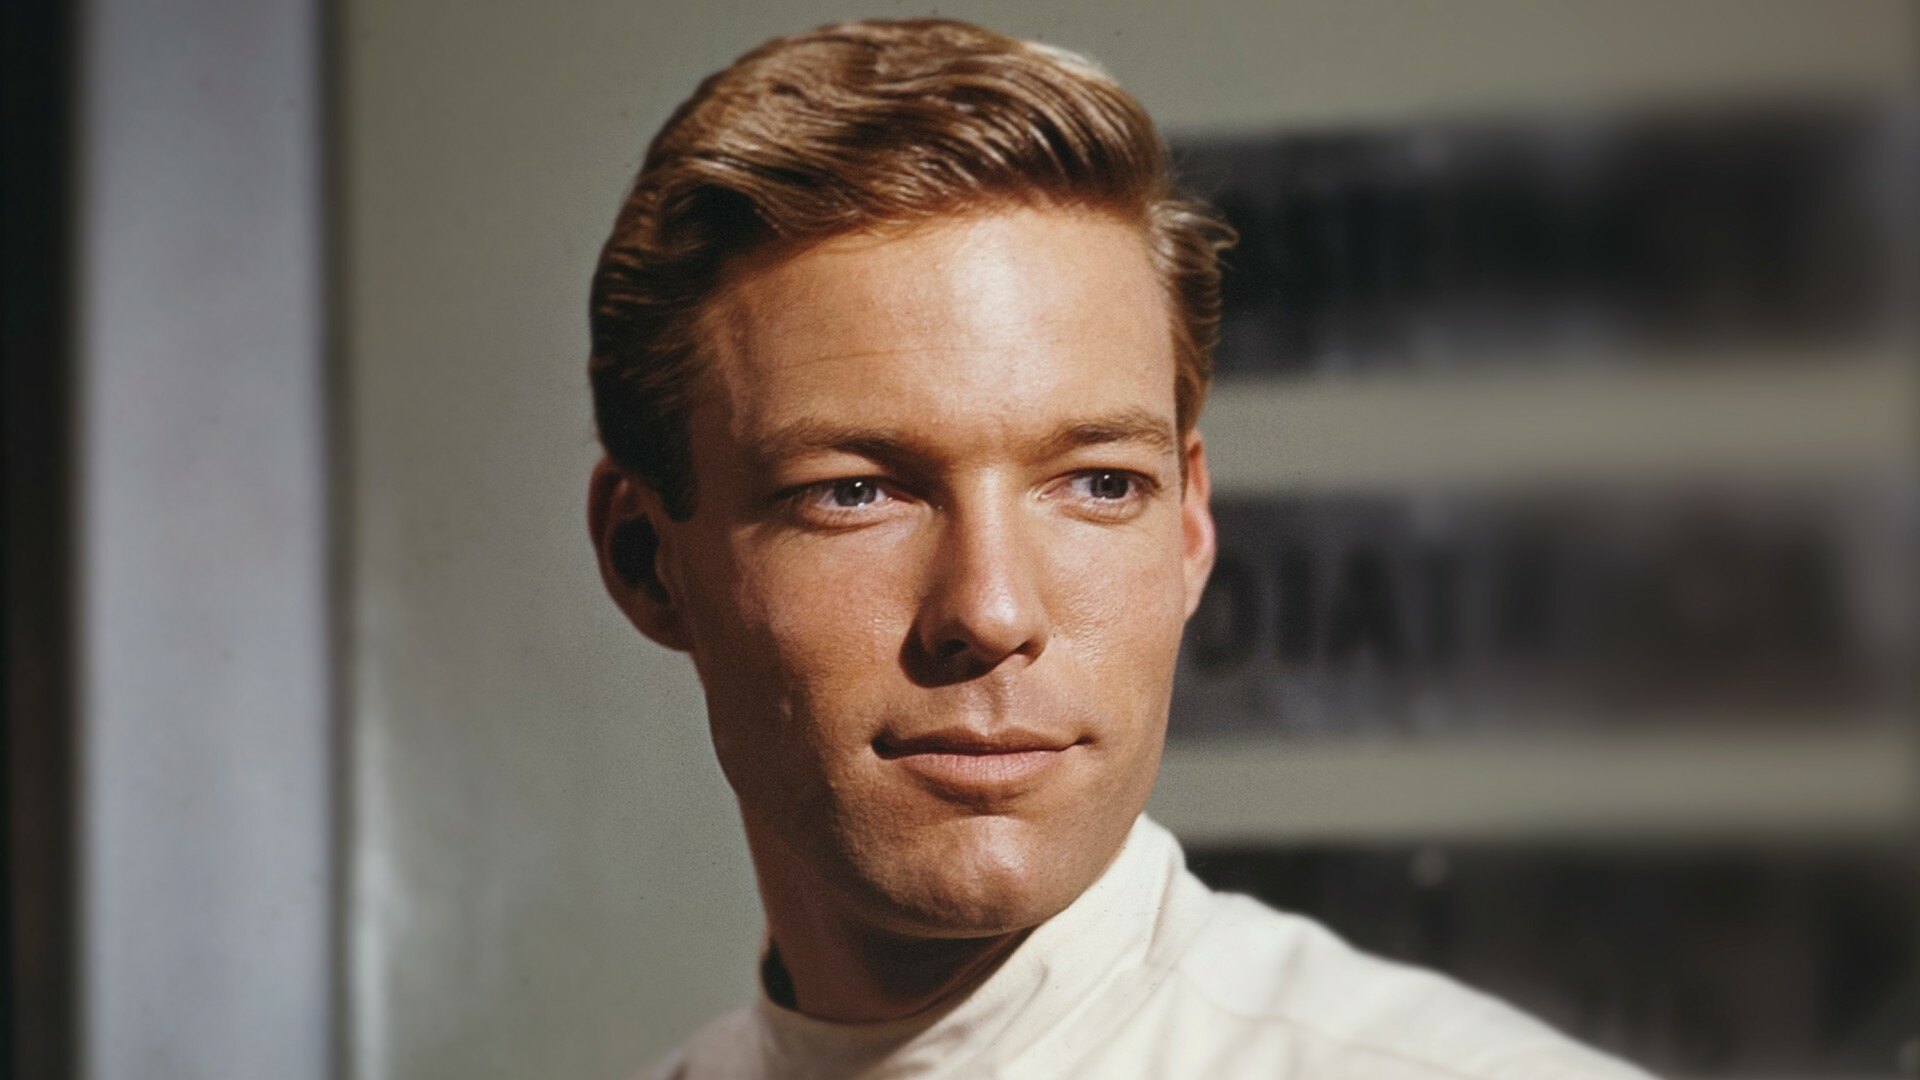 It is responsible for launching Richard Chamberlain's career. 